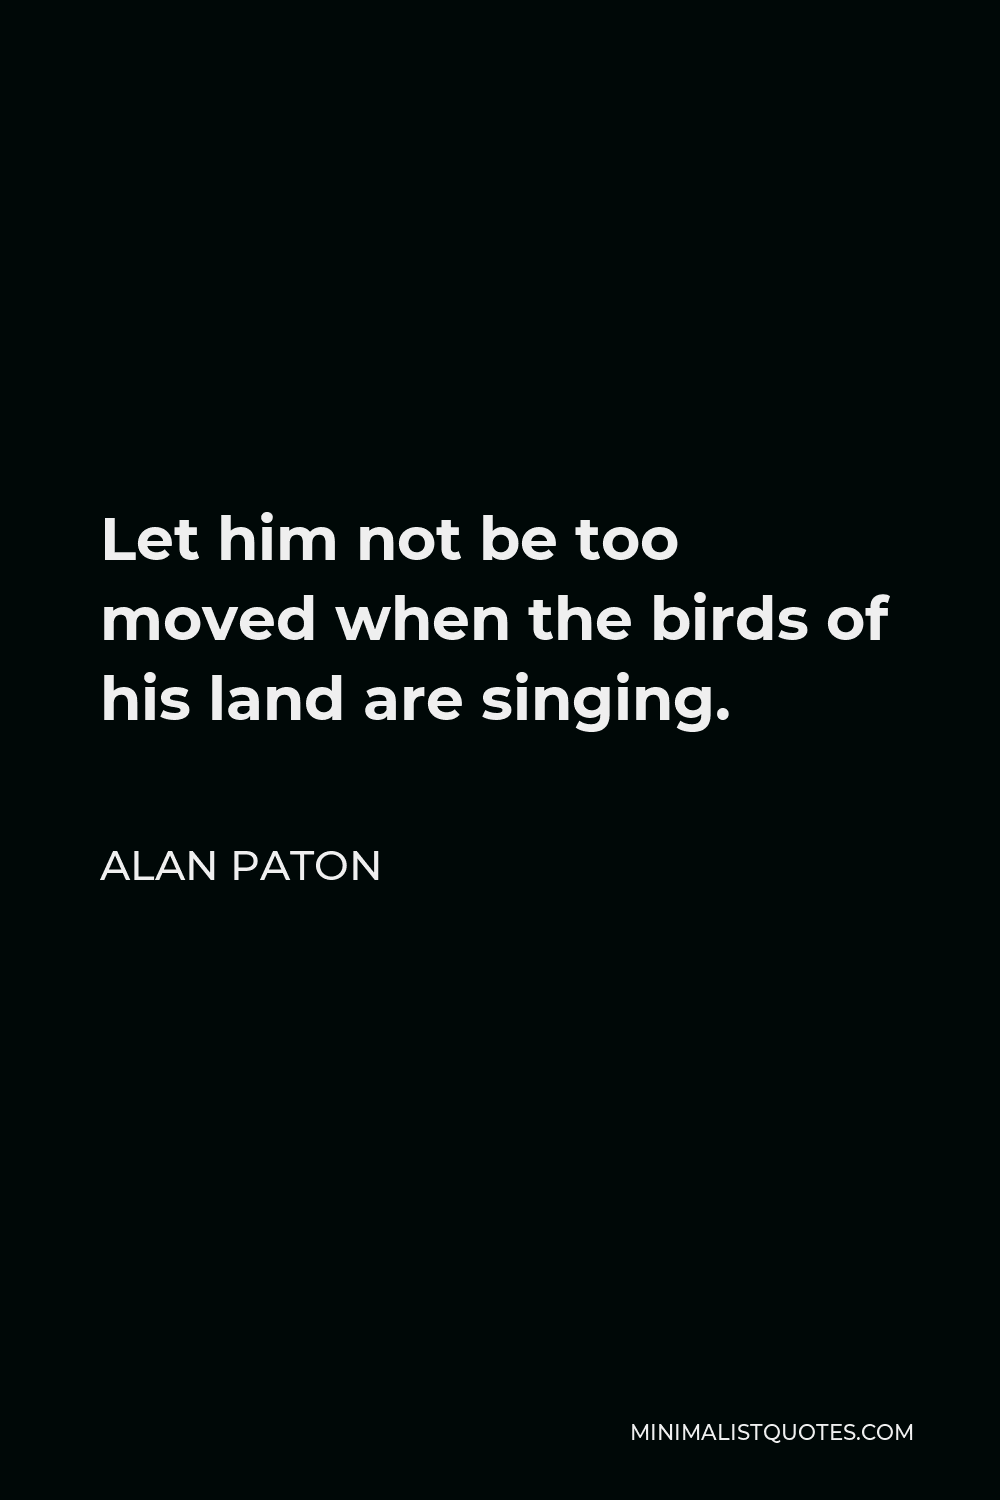 Alan Paton Quote - Let him not be too moved when the birds of his land are singing.